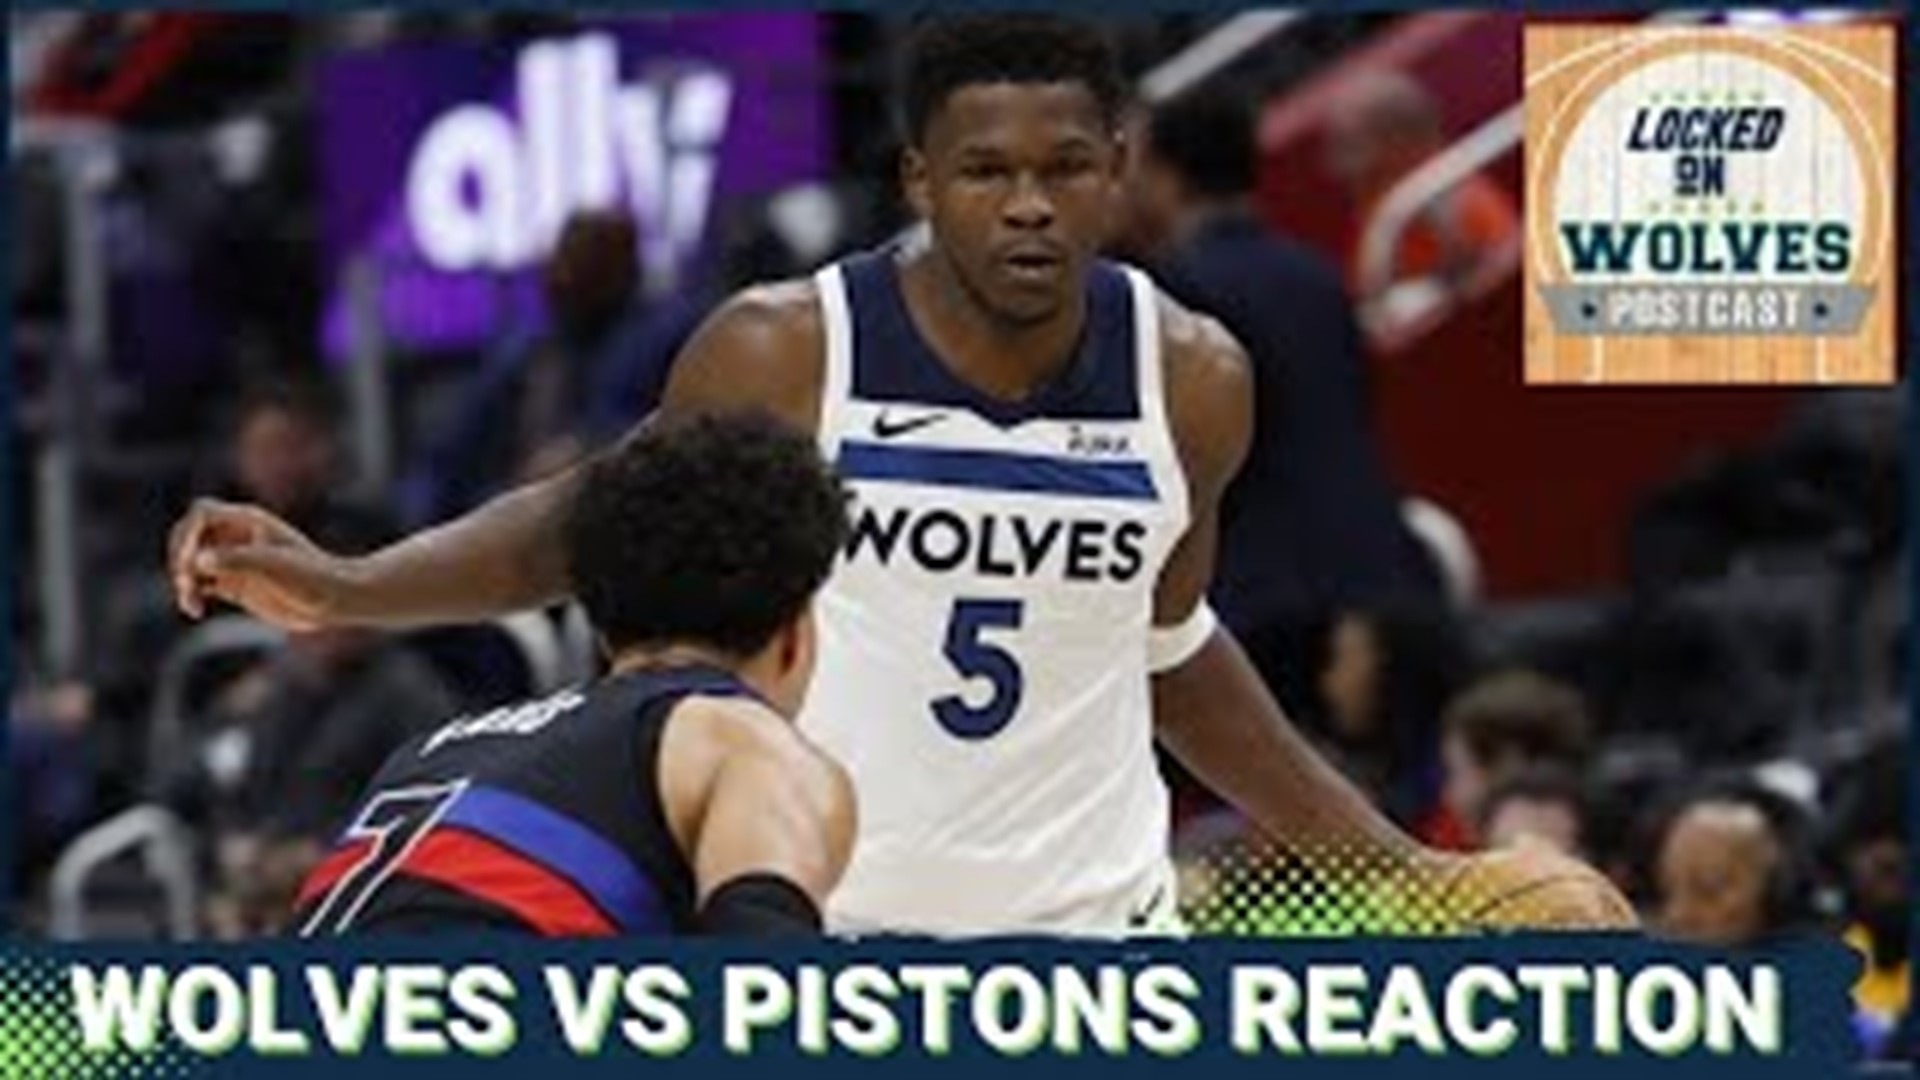 The Minnesota Timberwolves win their 50th game of the season for the first time in 19 years tonight with the 106-91 victory over the Detroit Pistons.